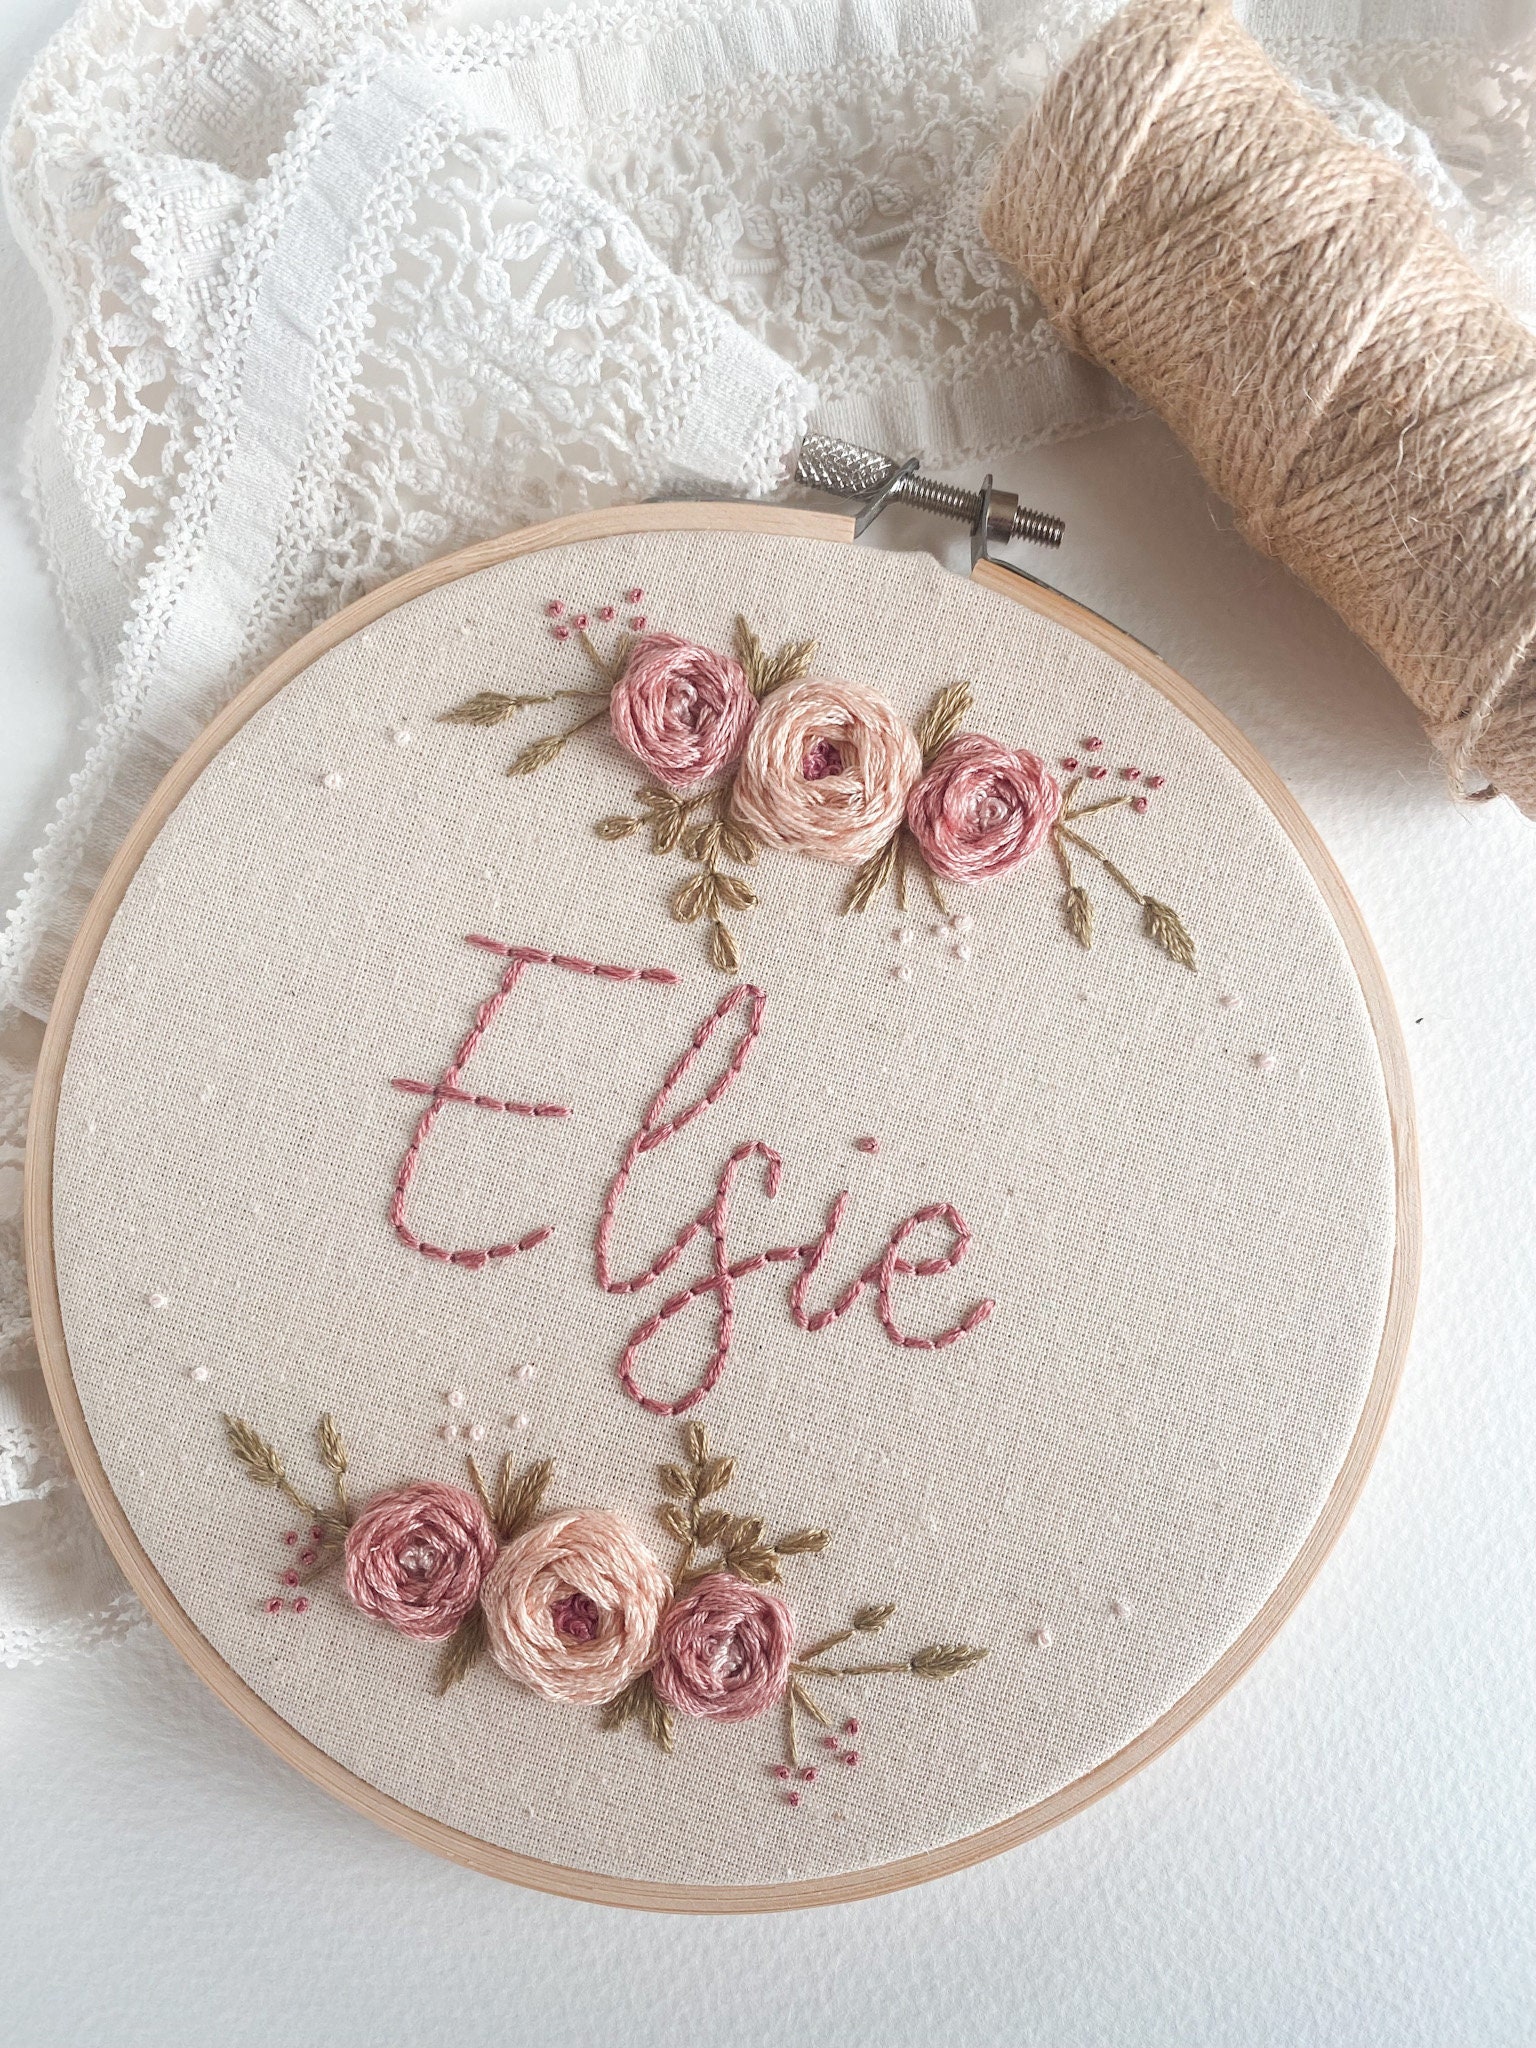 Vertical Oval Embroidery Hoop, 21 X 14cm Embroidery Hoopp. Wooden Embroidery  Hoop, Oval Embroidery Hoop. Small Wooden Embroidery Hoop. 